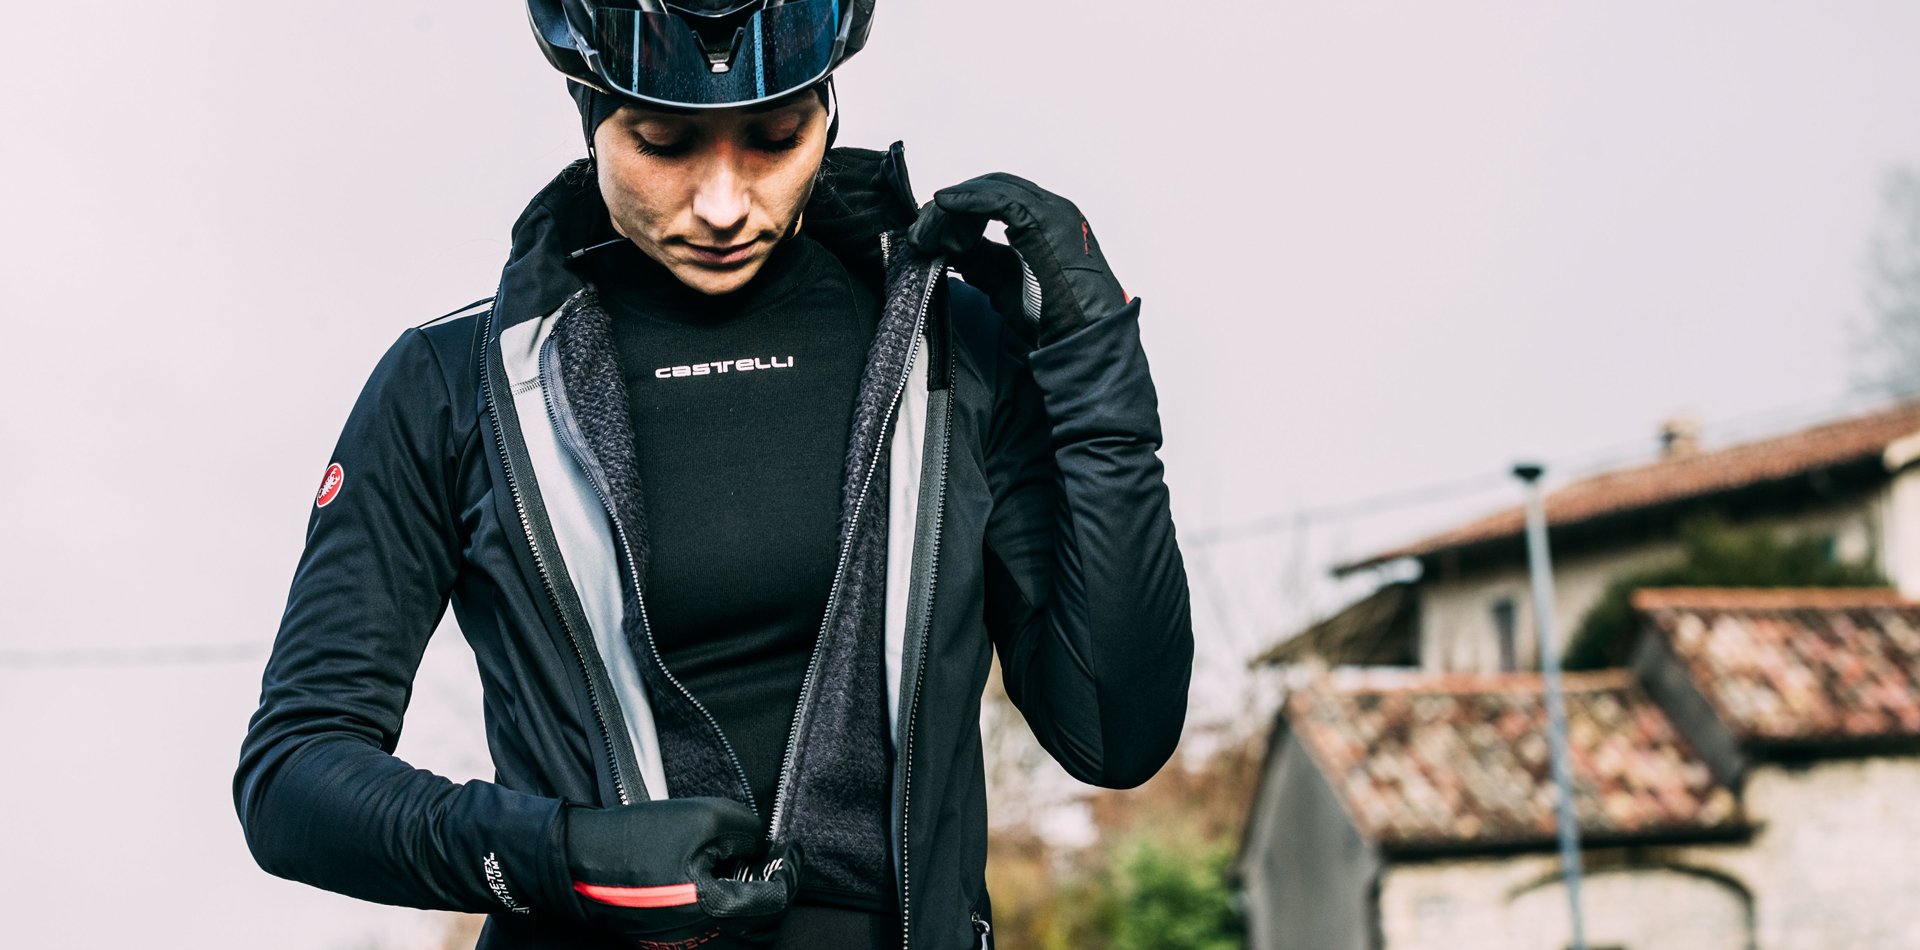 Winter Base Layer Guide - Castelli Cycling